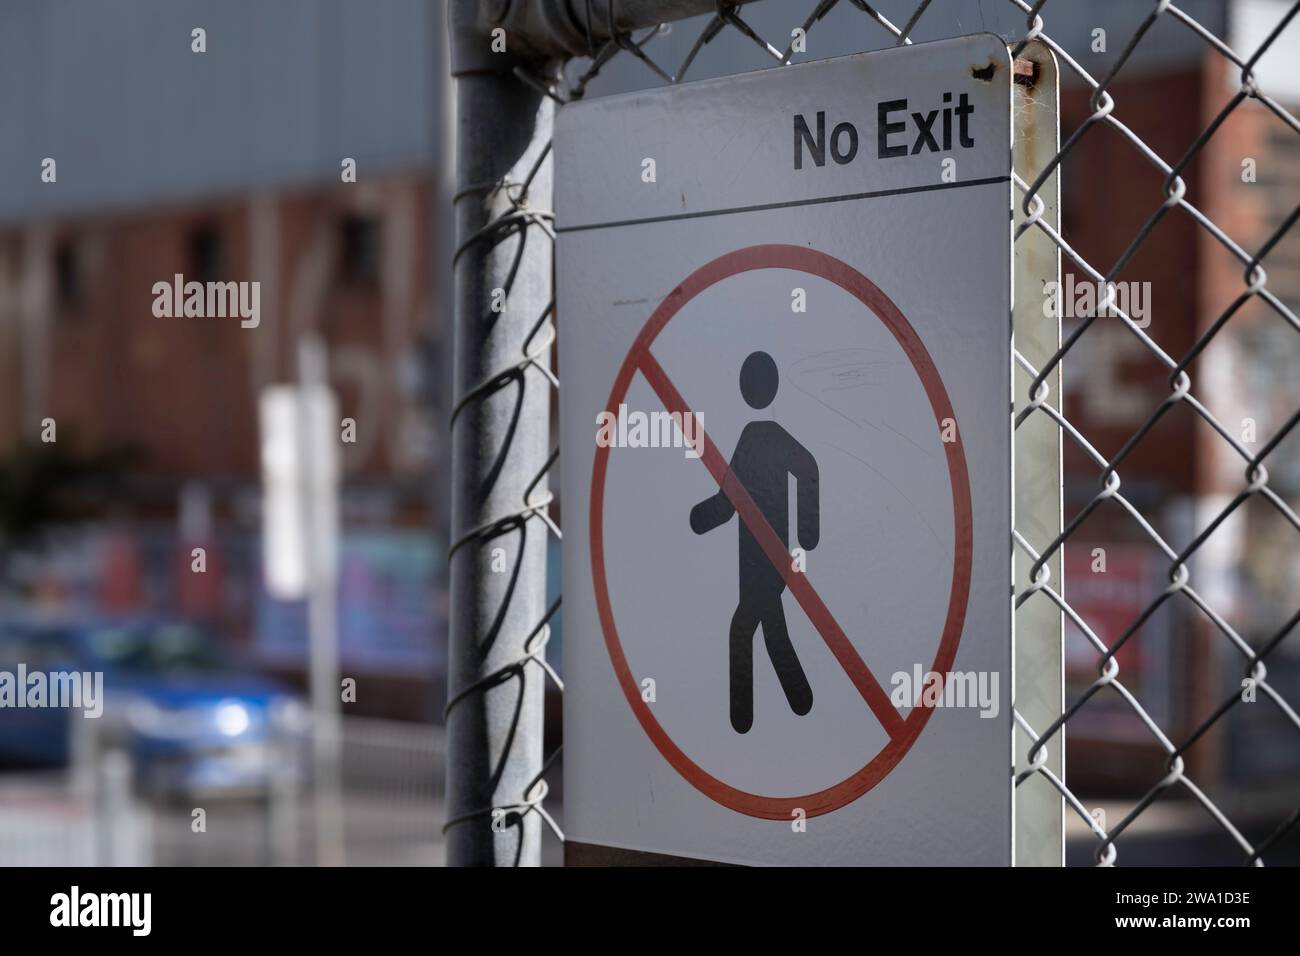 No exit sign mounted on a chain-link fence. Exit area prohibited sign. Blurred background of a road, car and building Stock Photo